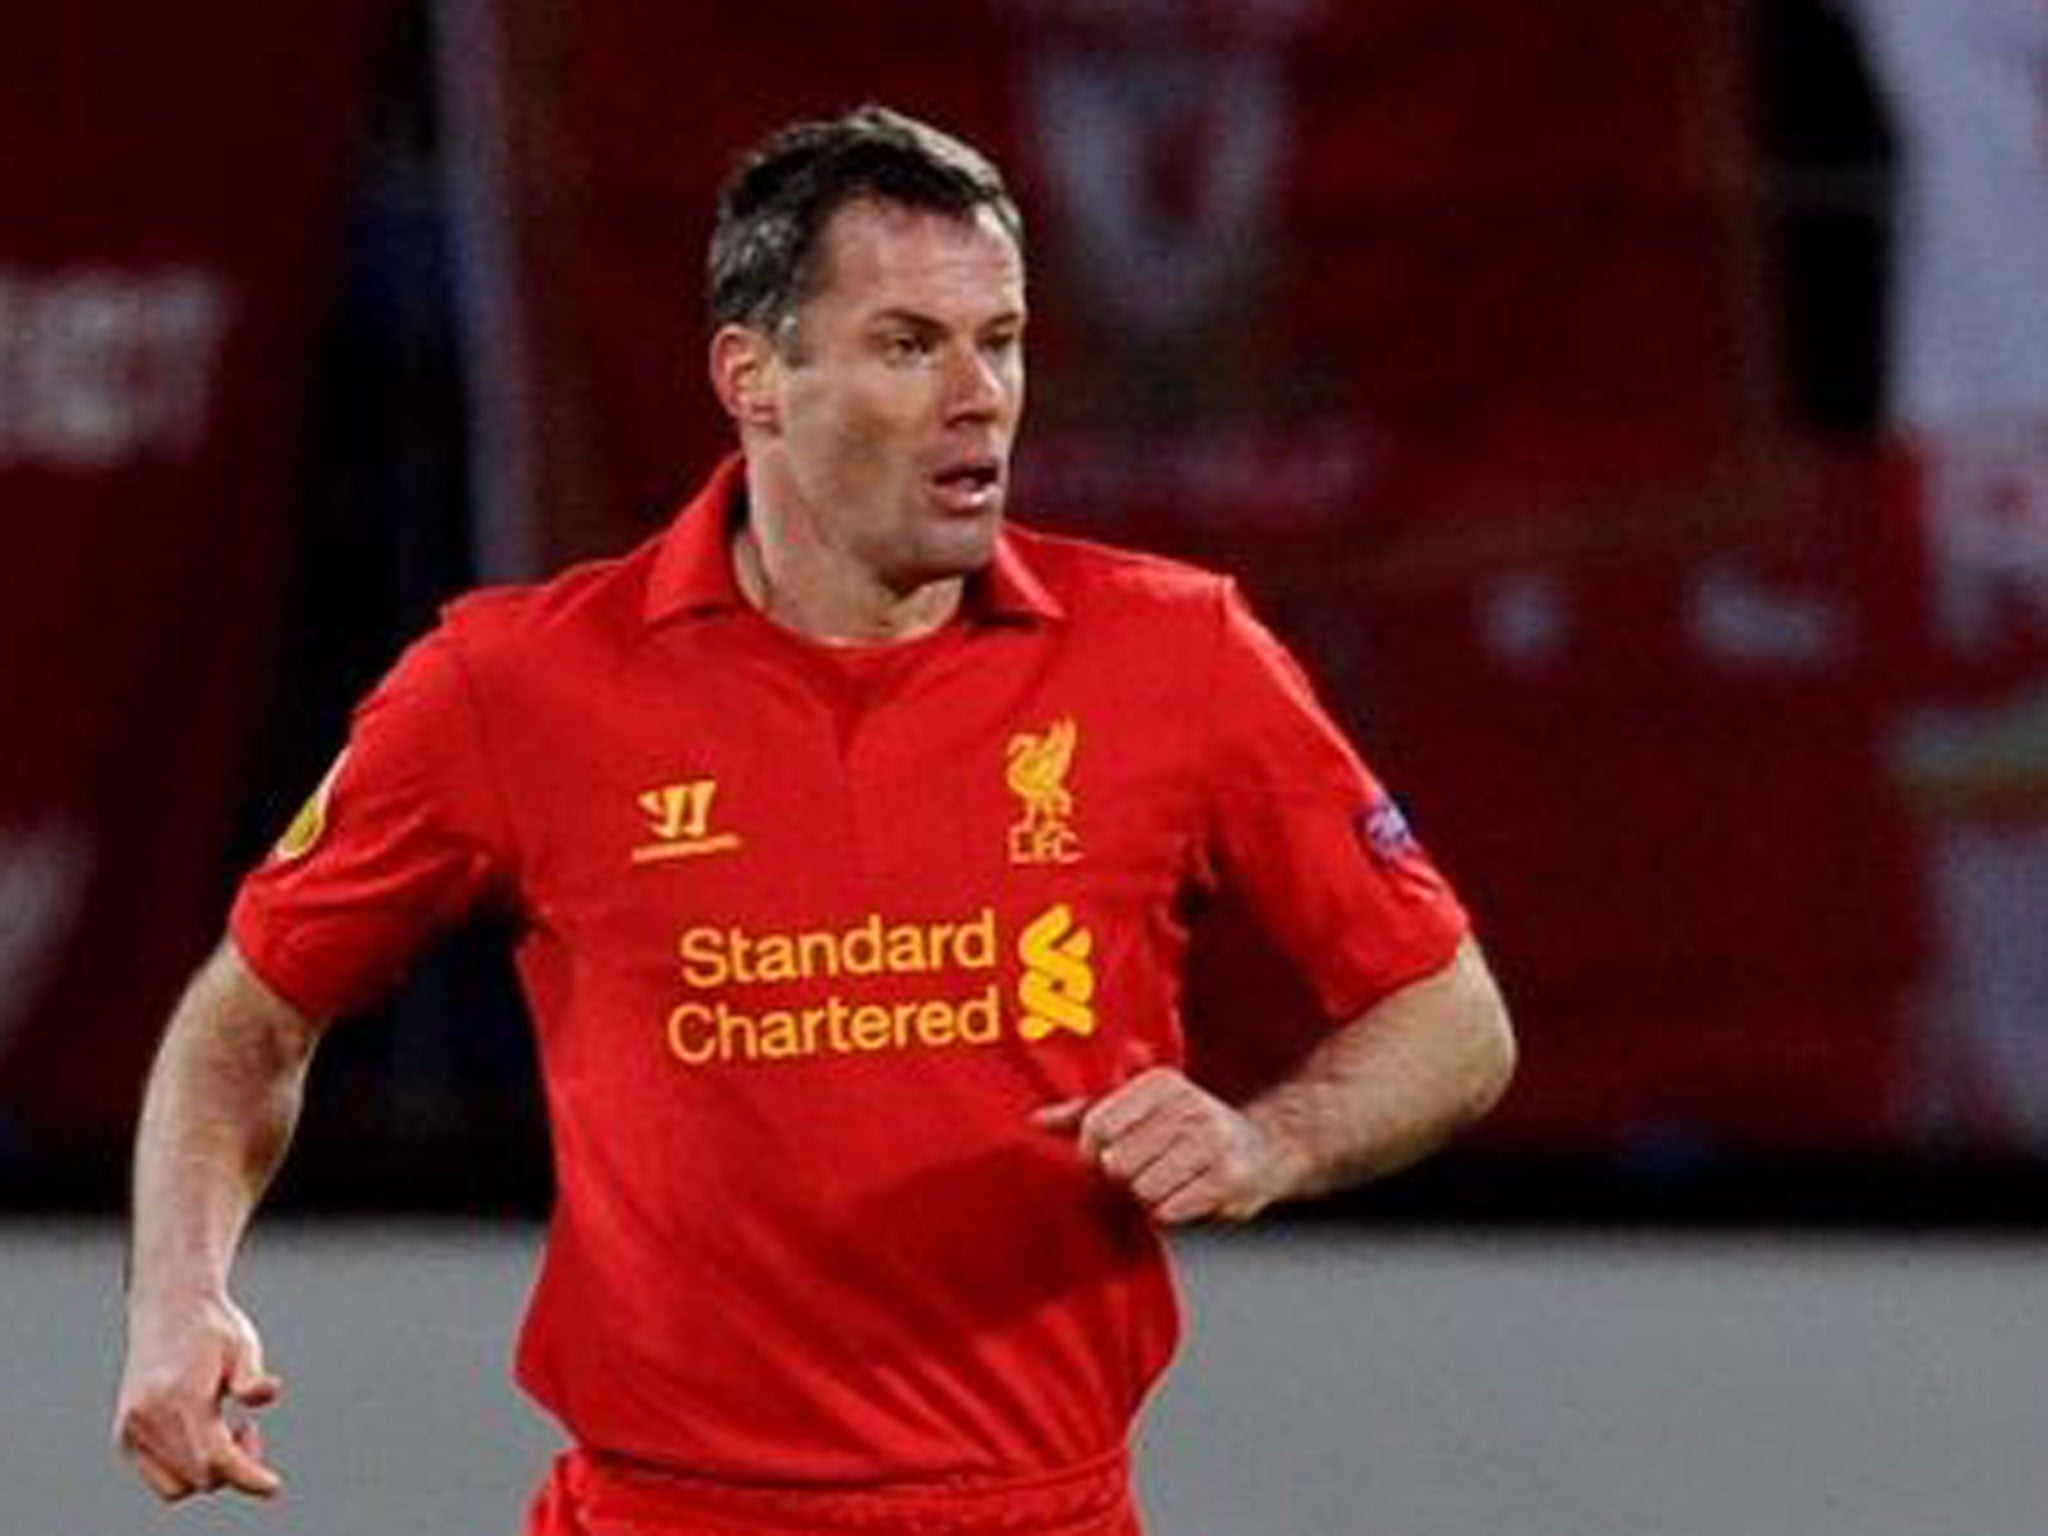 Liverpool's Jamie Carragher playing against Zenit St Petersburg on Thursday